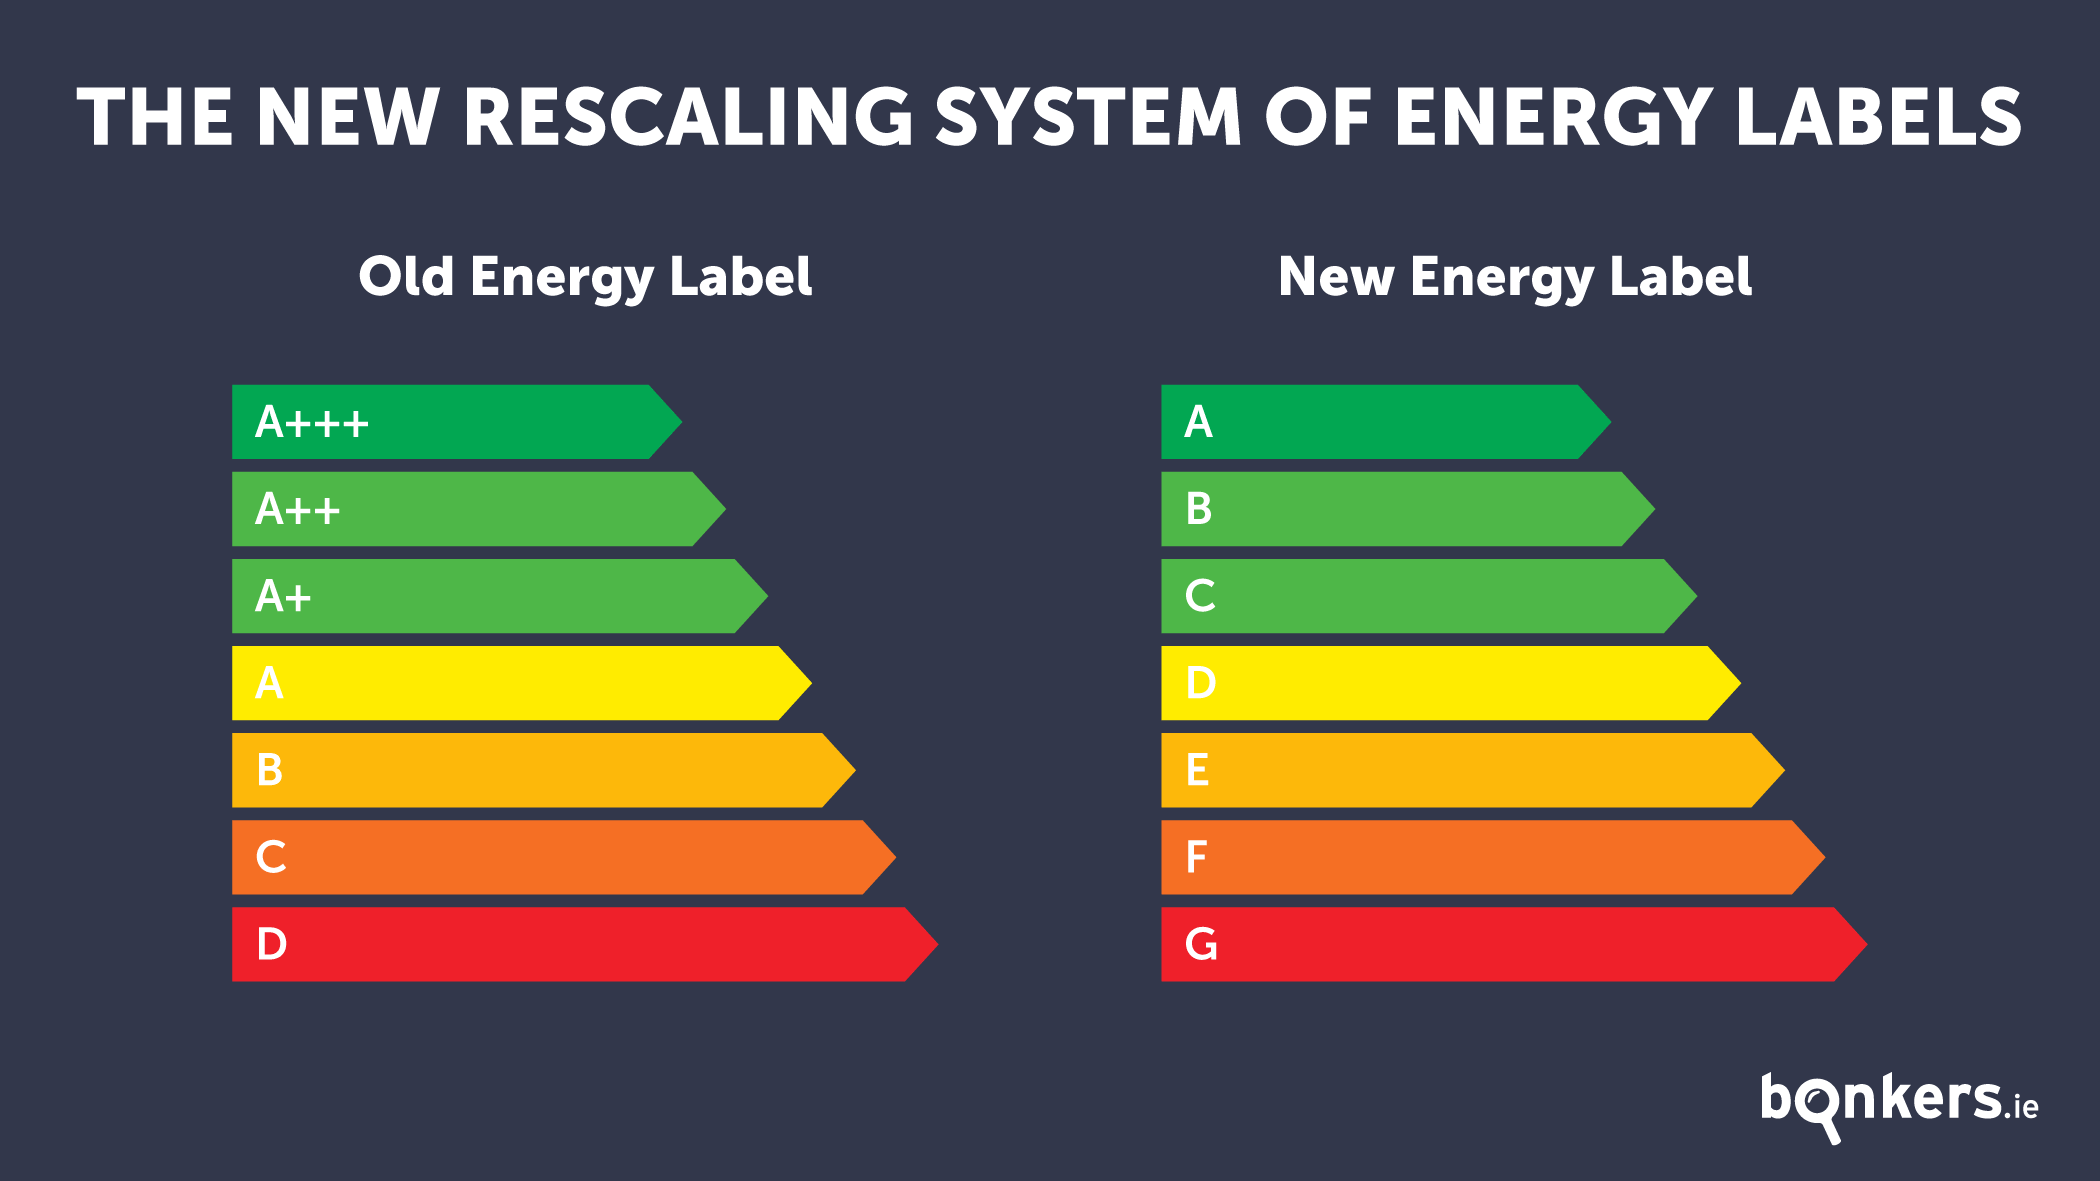 The new rescaling system of energy labels